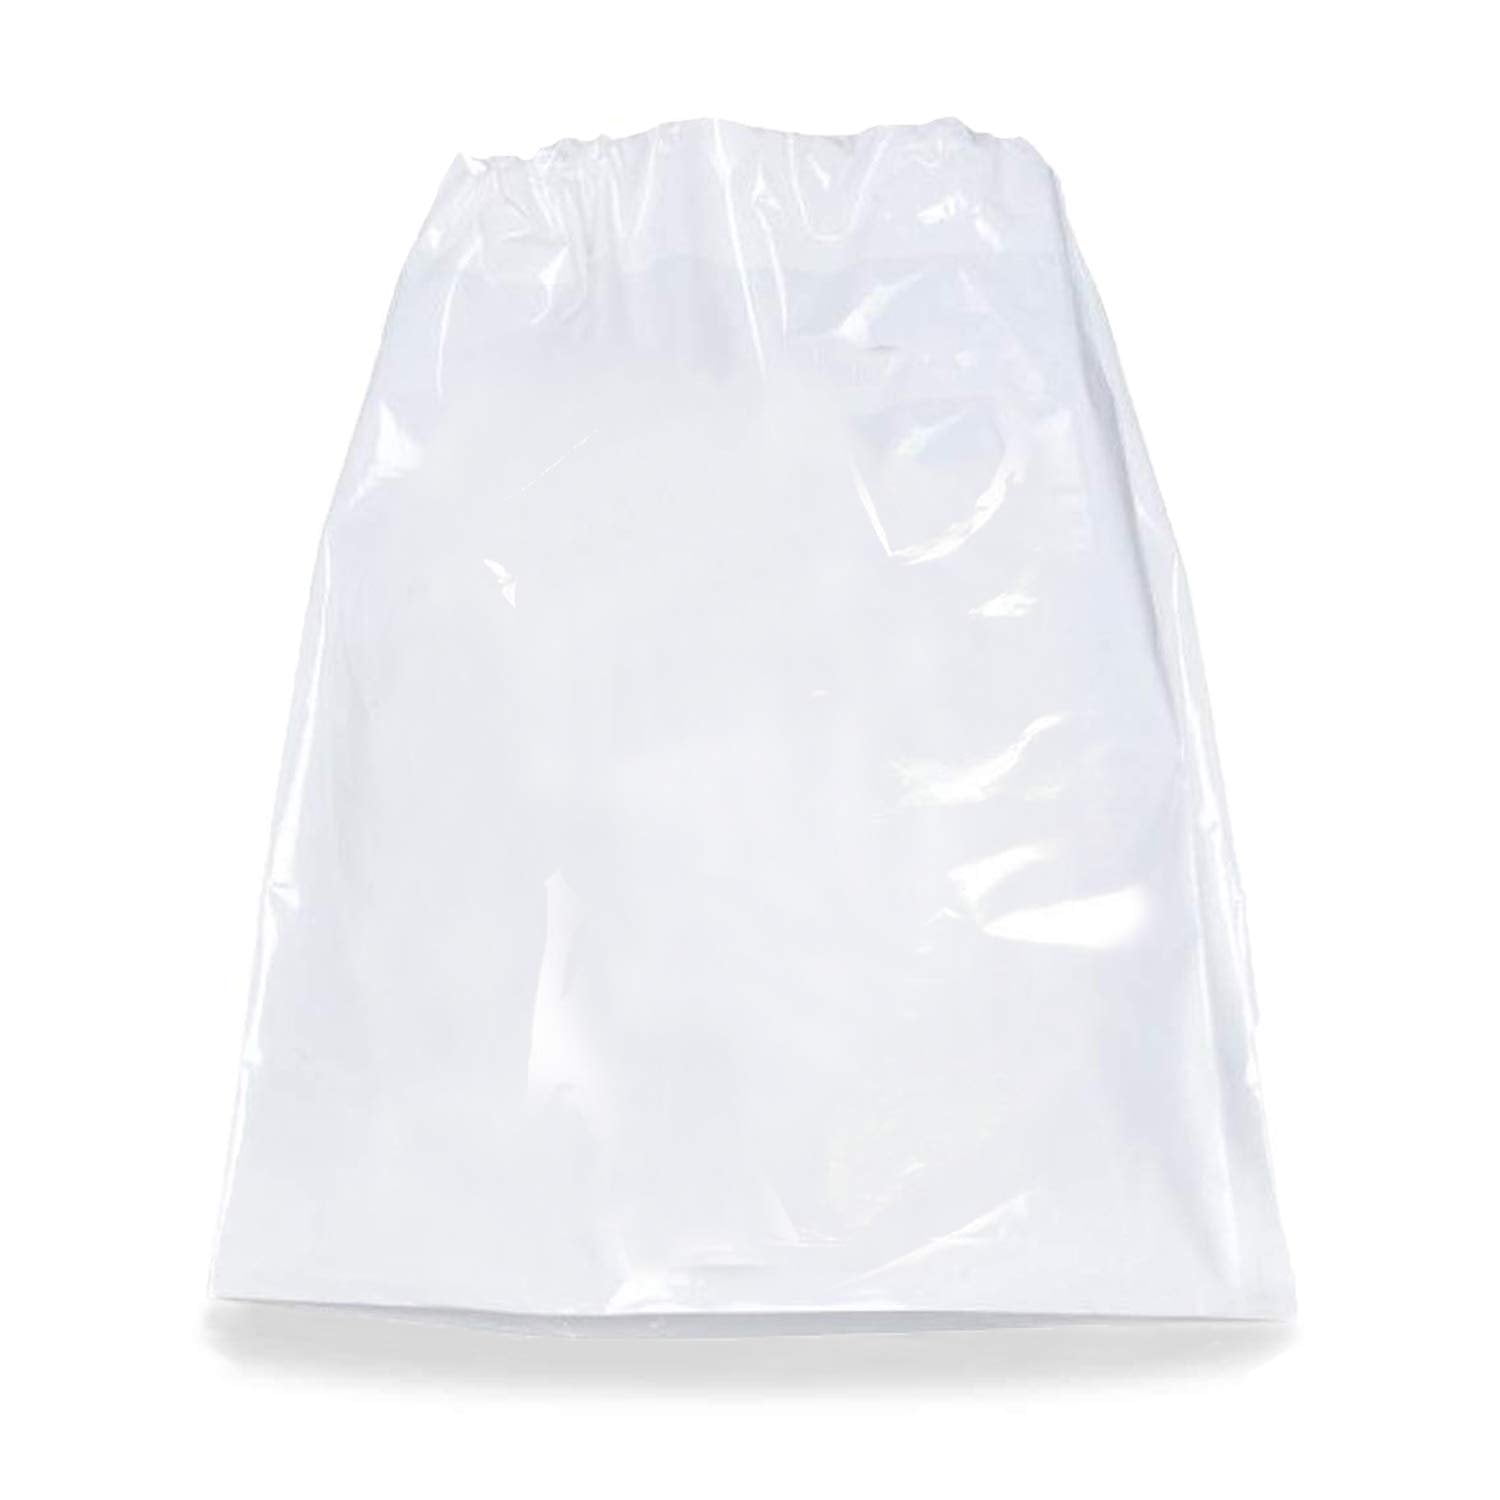 5 x 6 Poly Bag with Double Drawstring (4 mil)